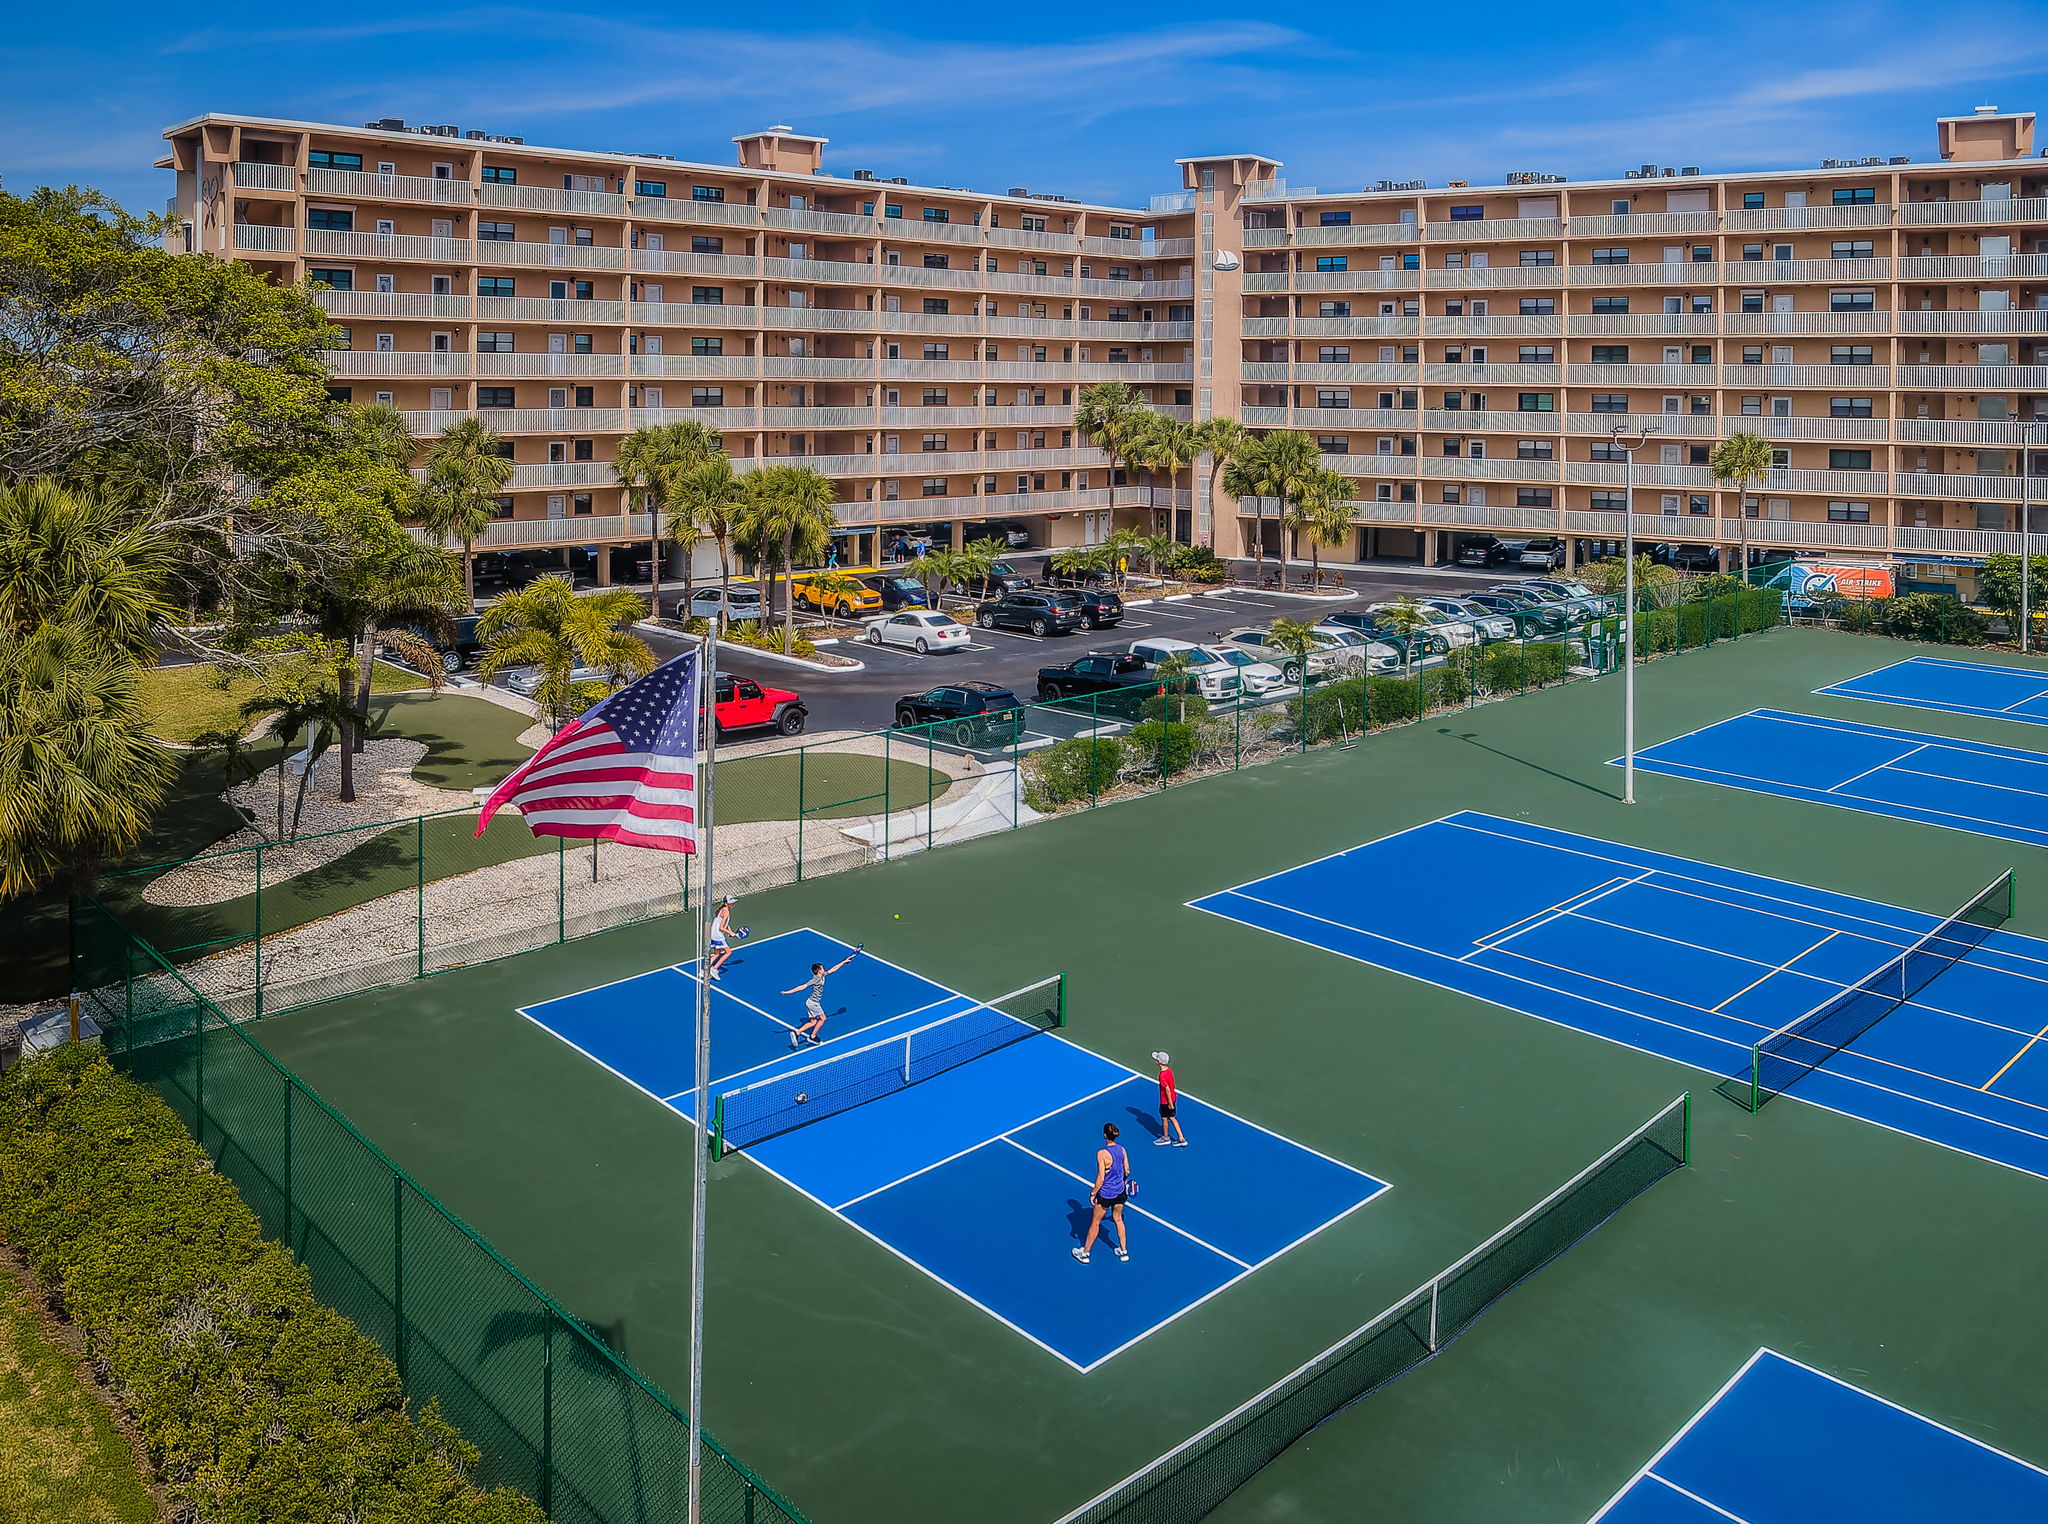 Tennis and Pickleball Courts25